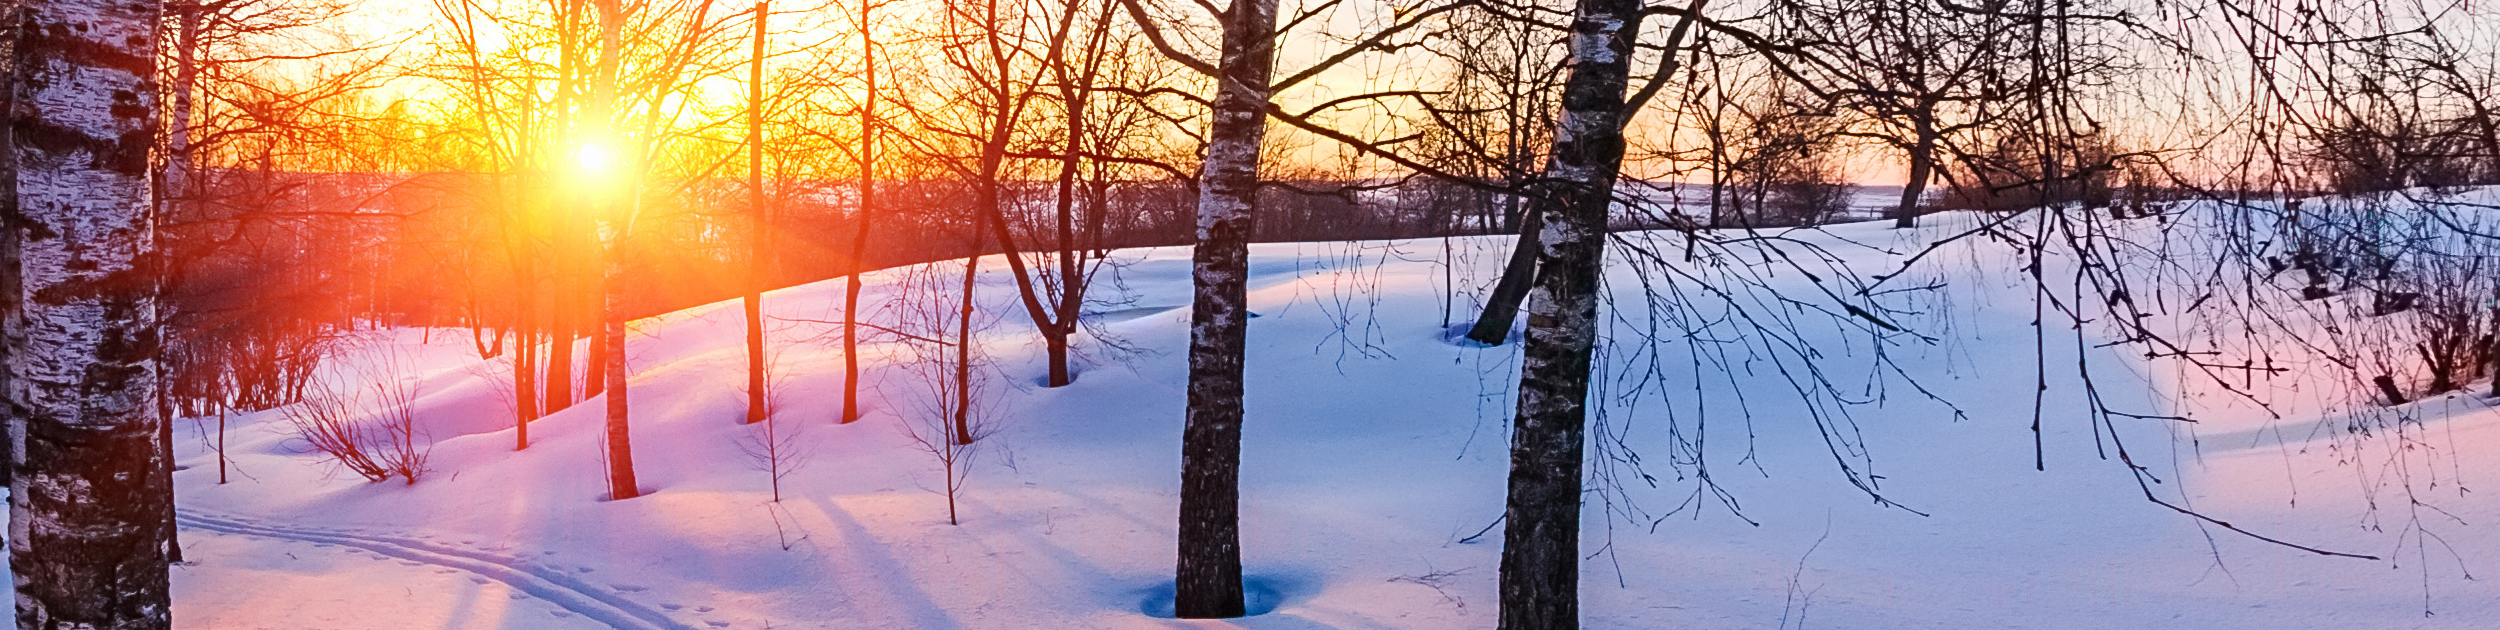 sun setting in snow cover woods